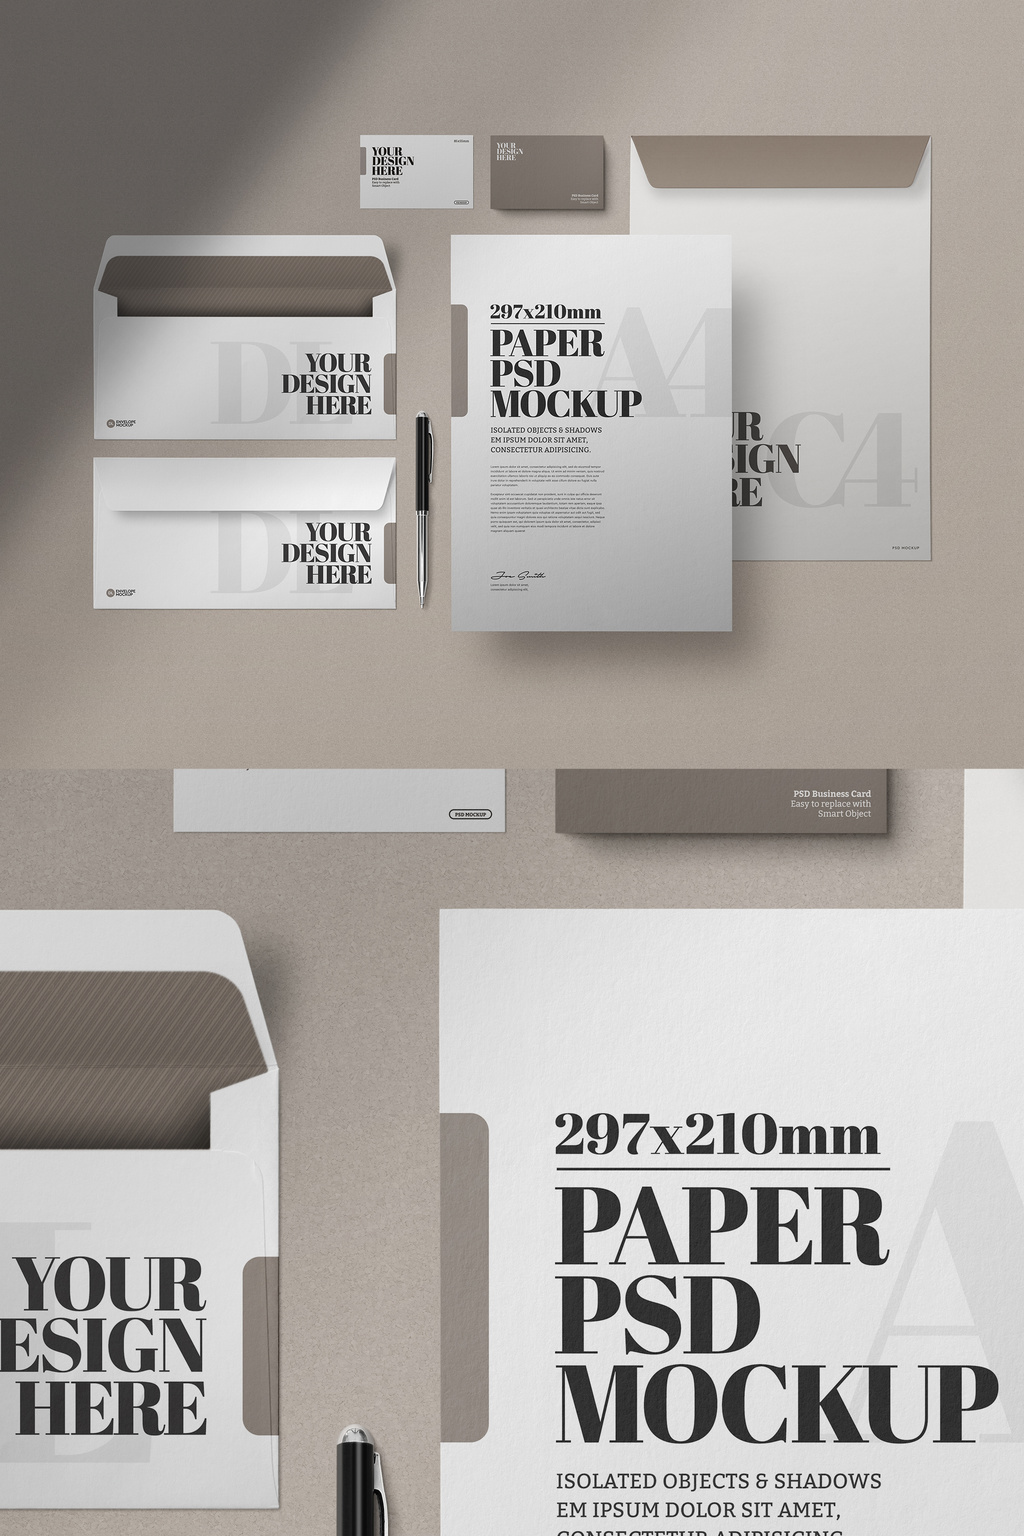 Download Download This Stationery Photoshop Mockup At Adobe Stock Laptrinhx